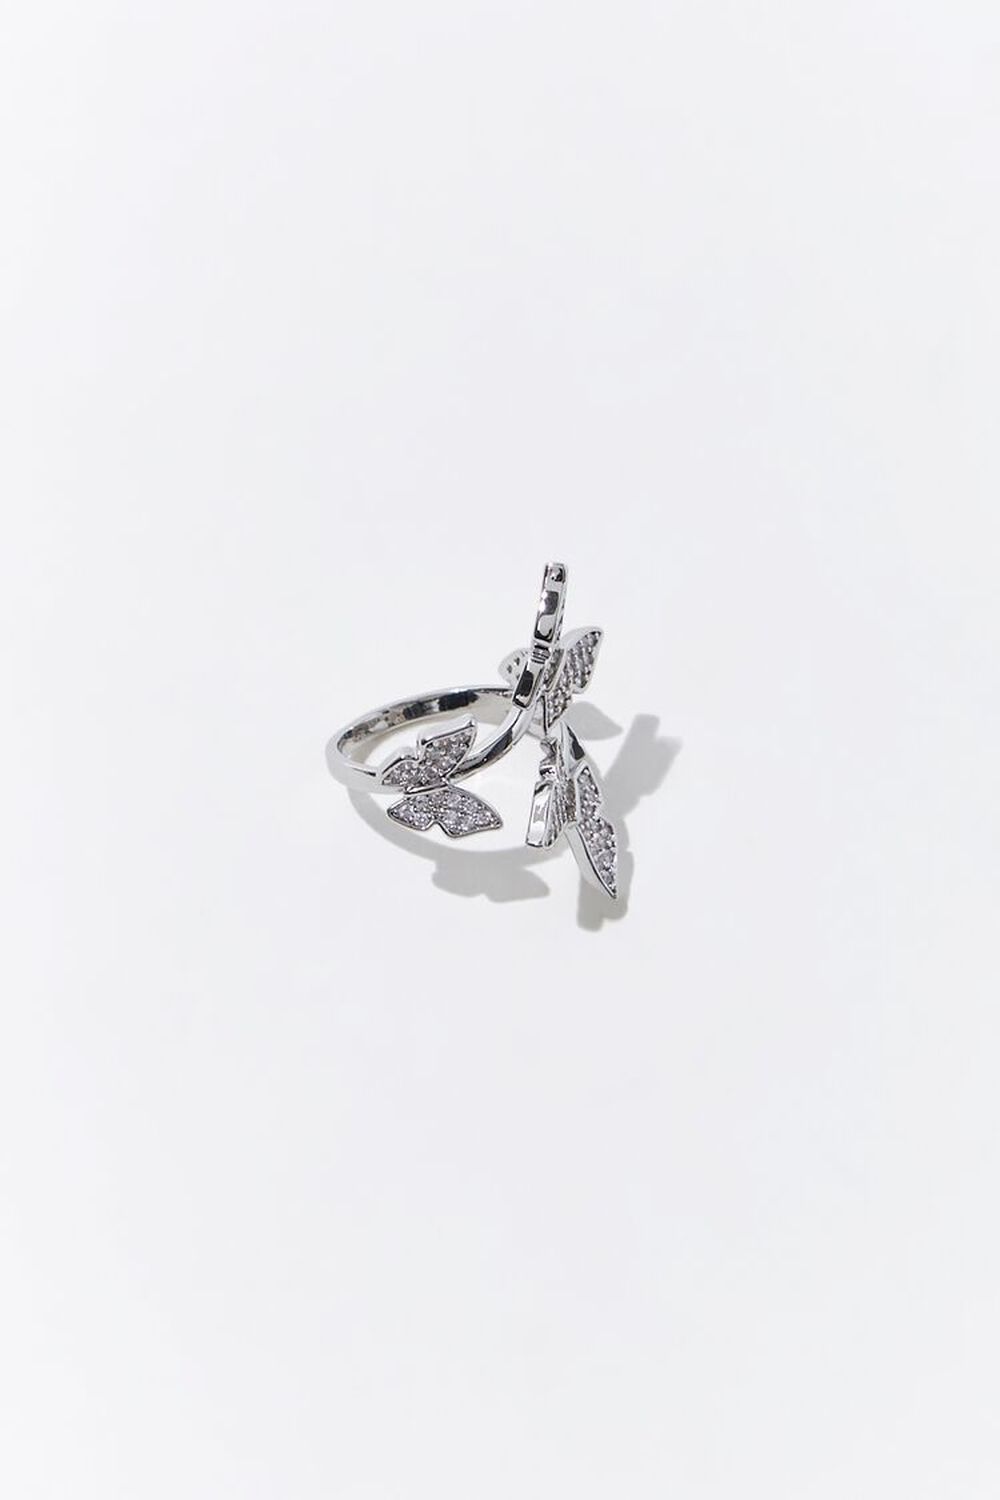 SILVER Butterfly Charm Cocktail Ring, image 2